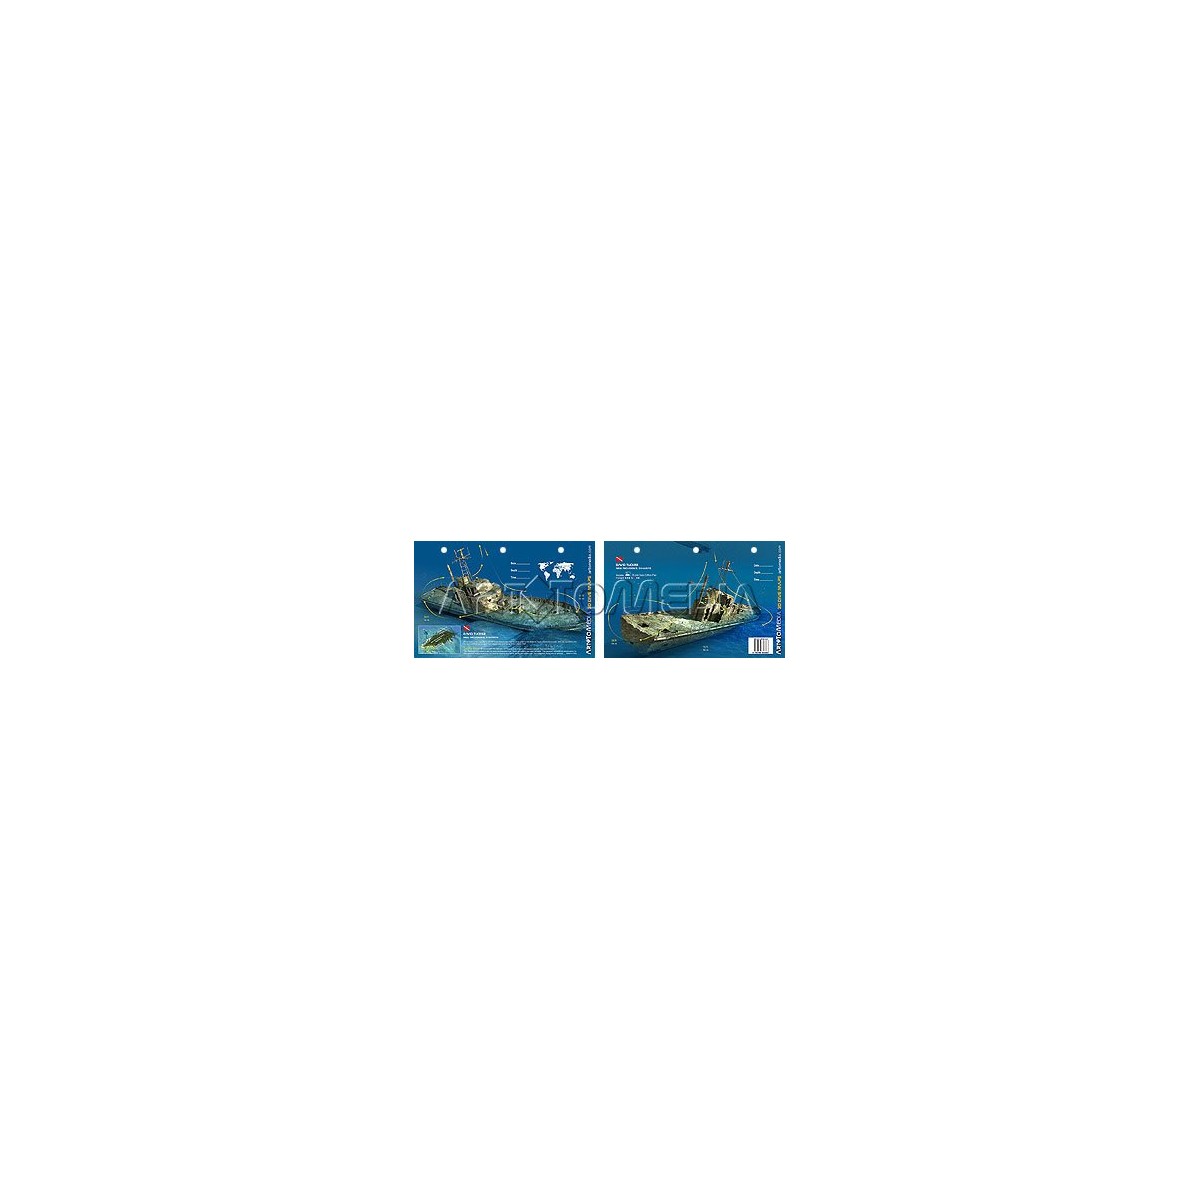 David Tucker in the Bahamas (8.5 x 5.5 Inches) (21.6 x 15cm) - New Art to Media Underwater Waterproof 3D Dive Site Map